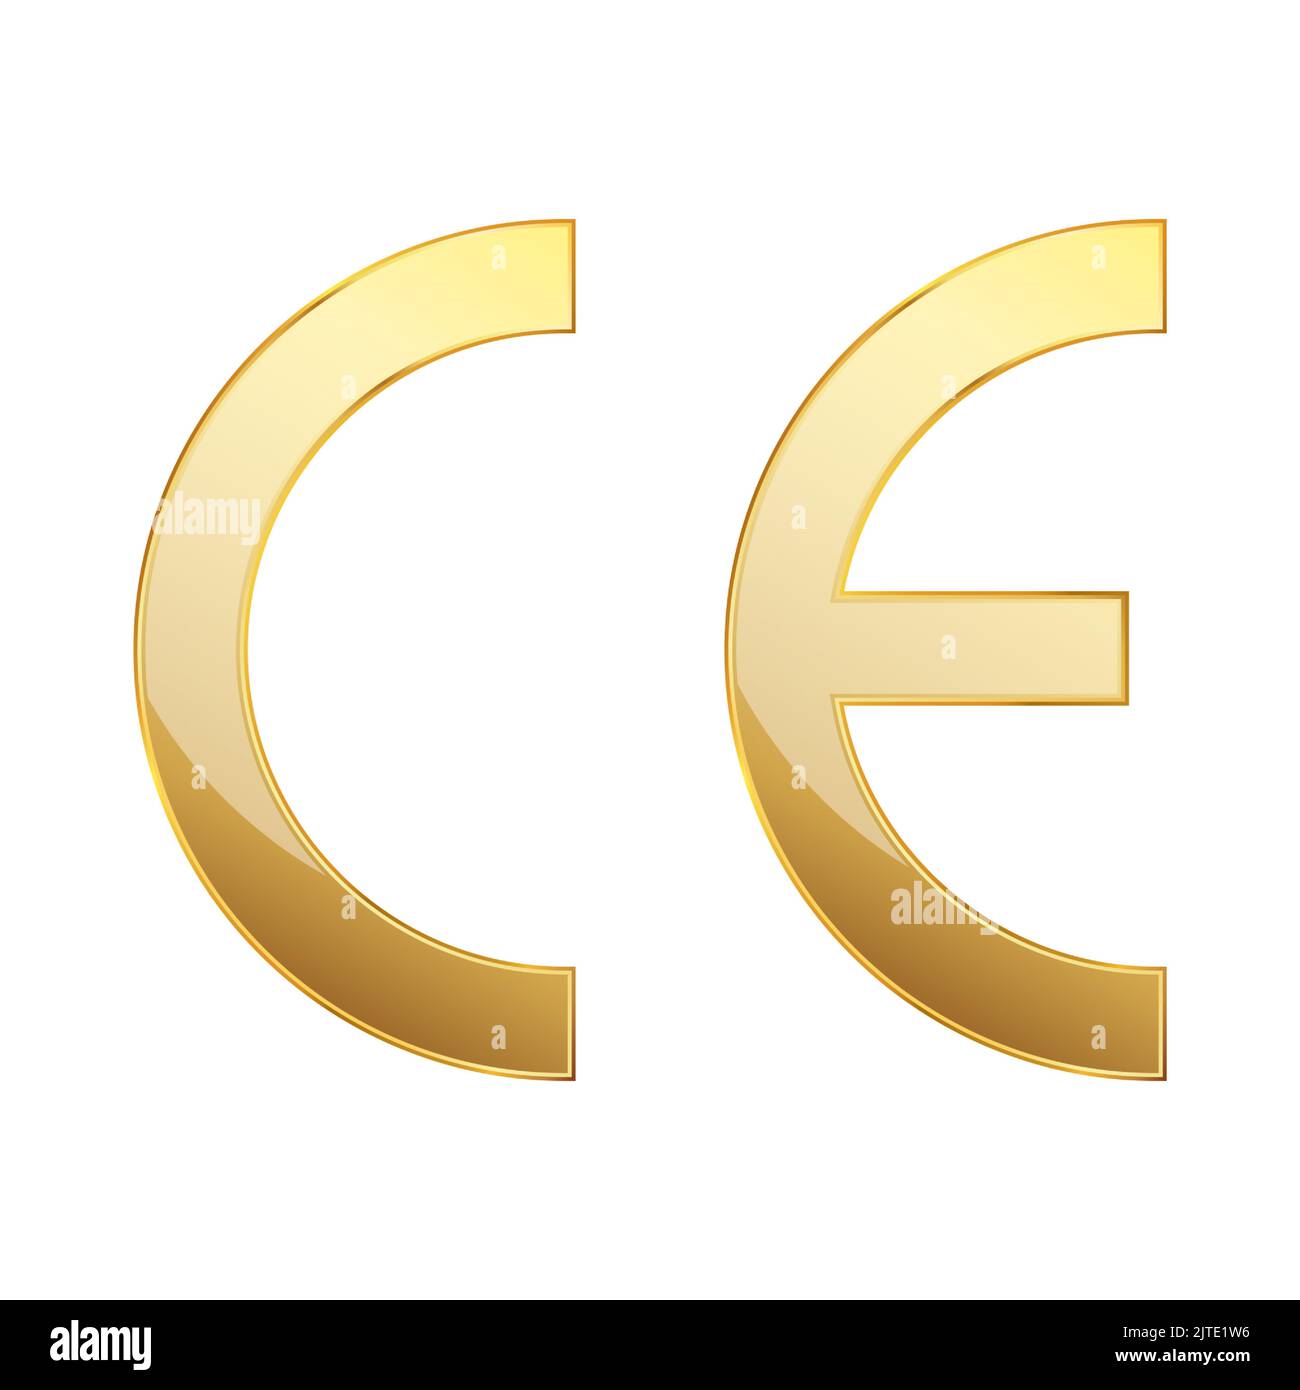 CE mark gold symbol. CE symbol isolated on white background. Gold vector icon. European conformity certification mark. Stock Vector